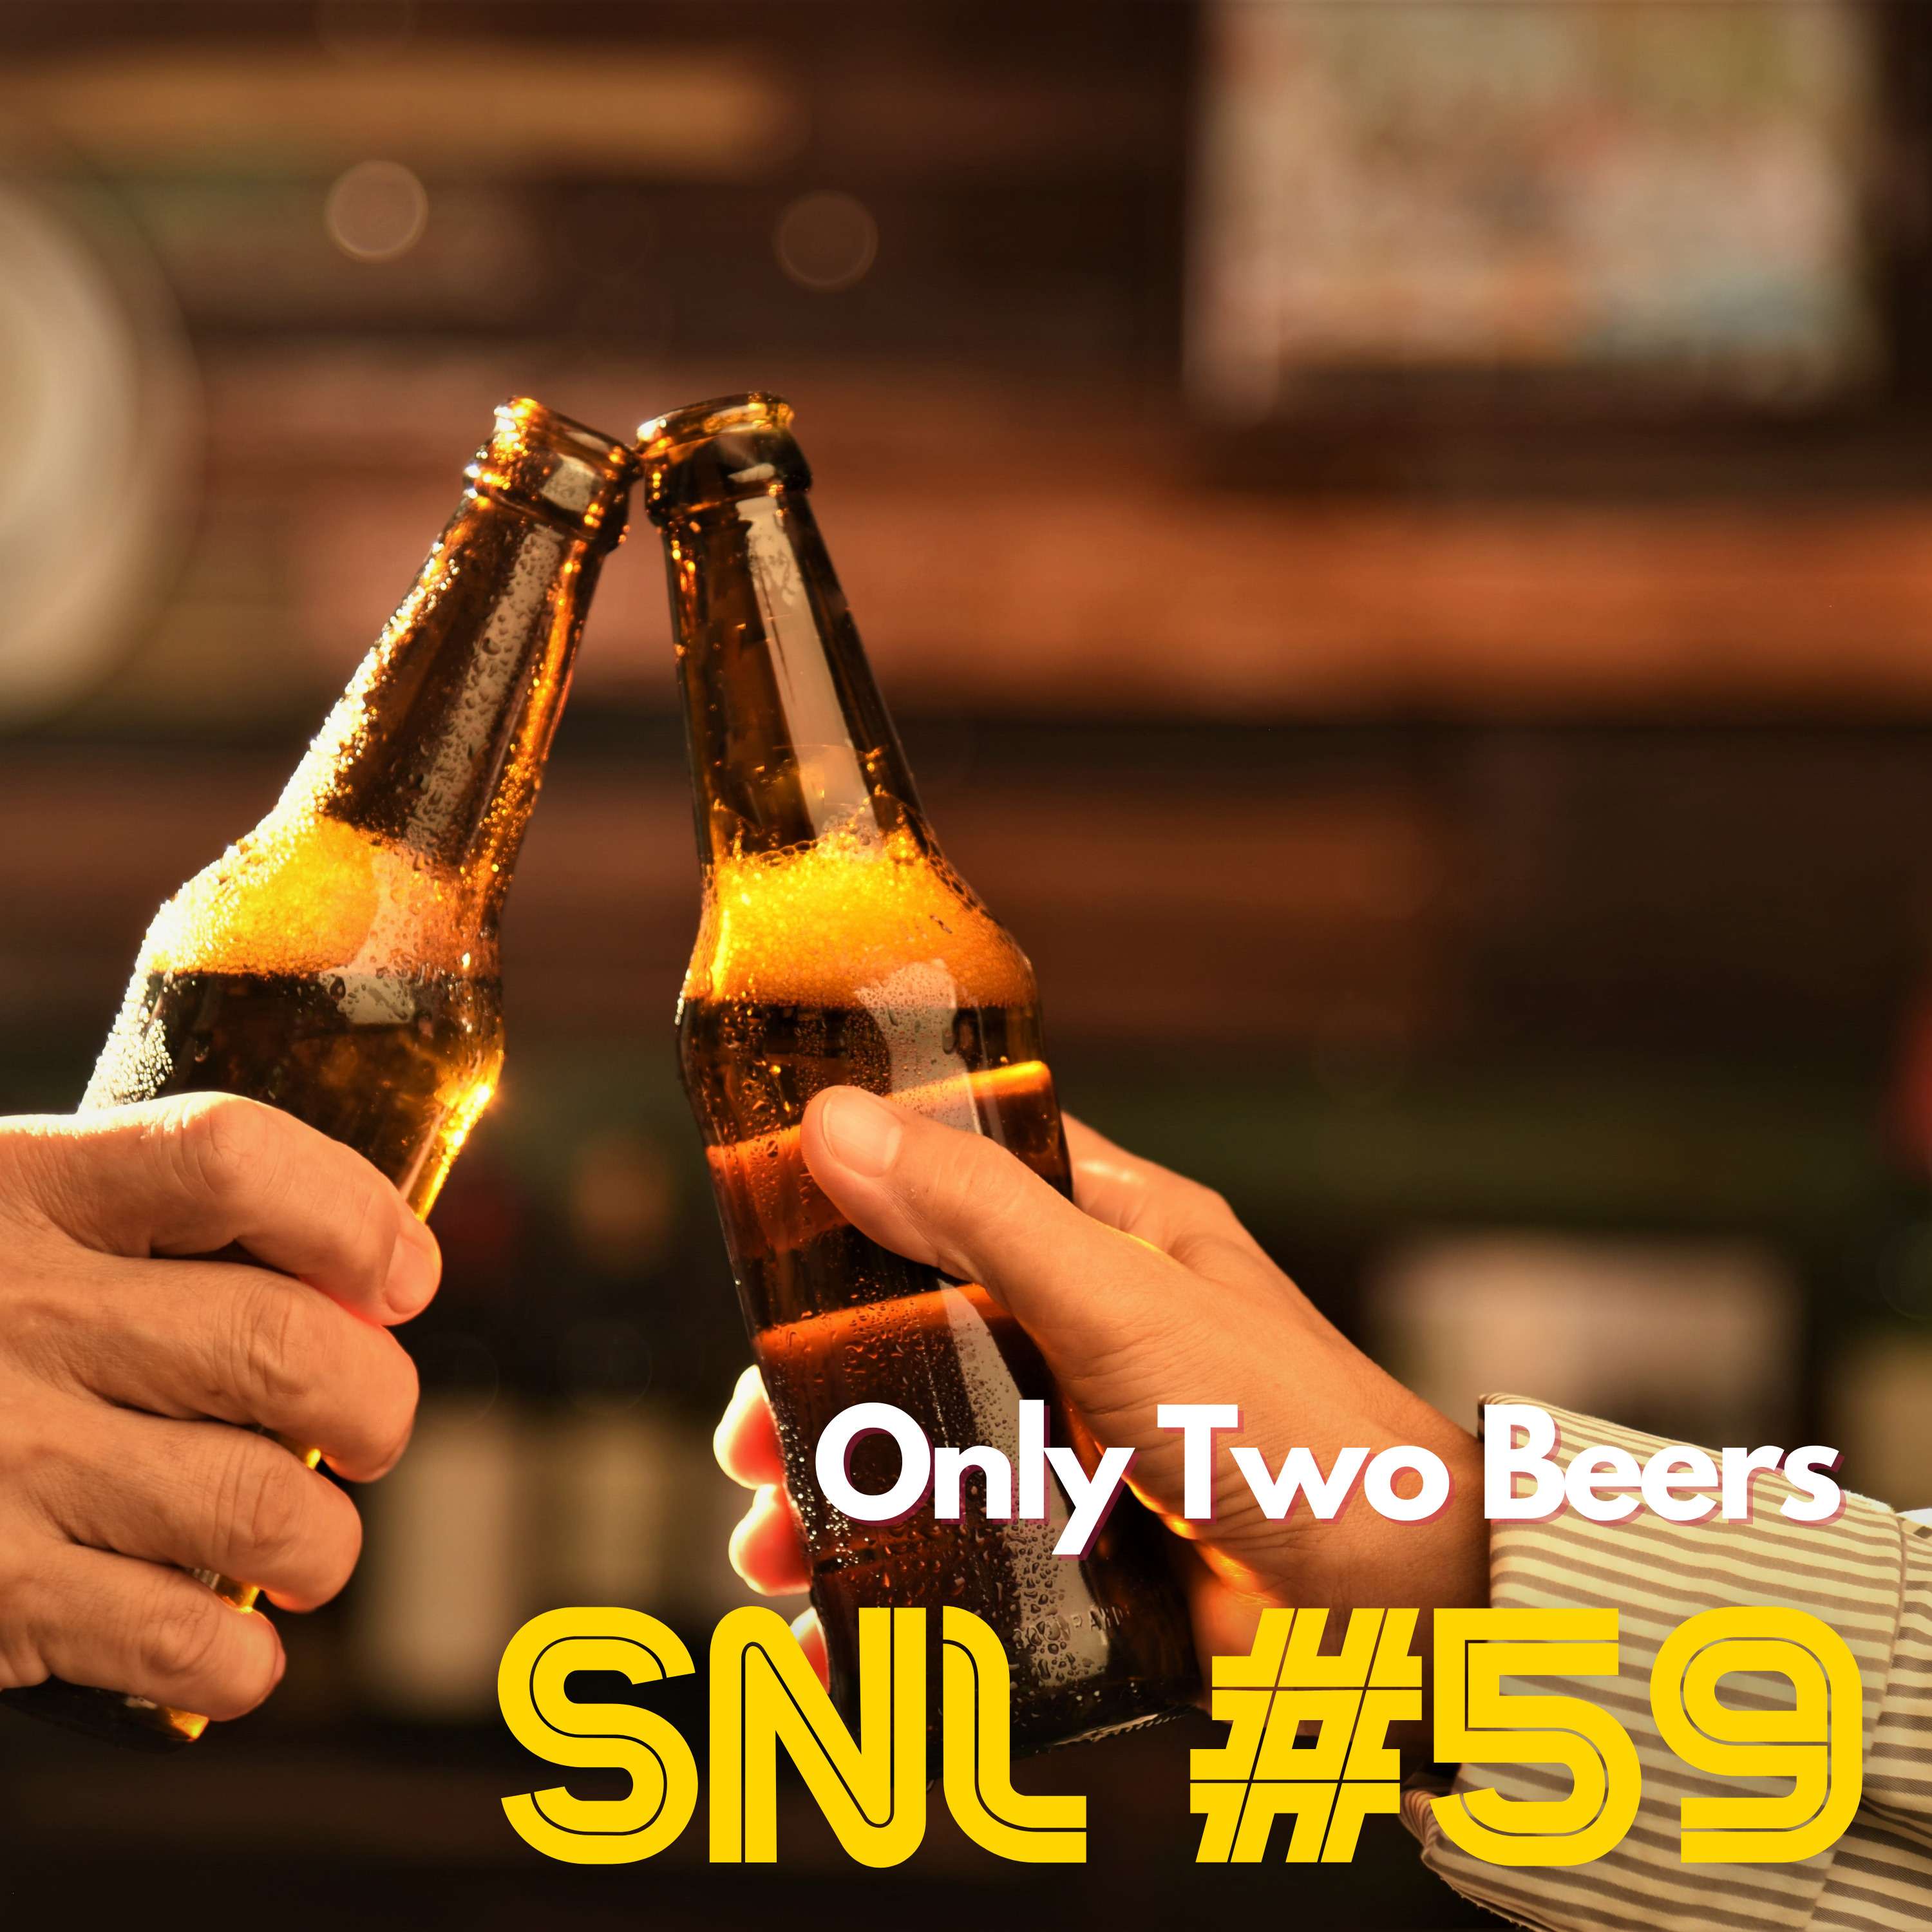 SNL #59: Only Two Beers